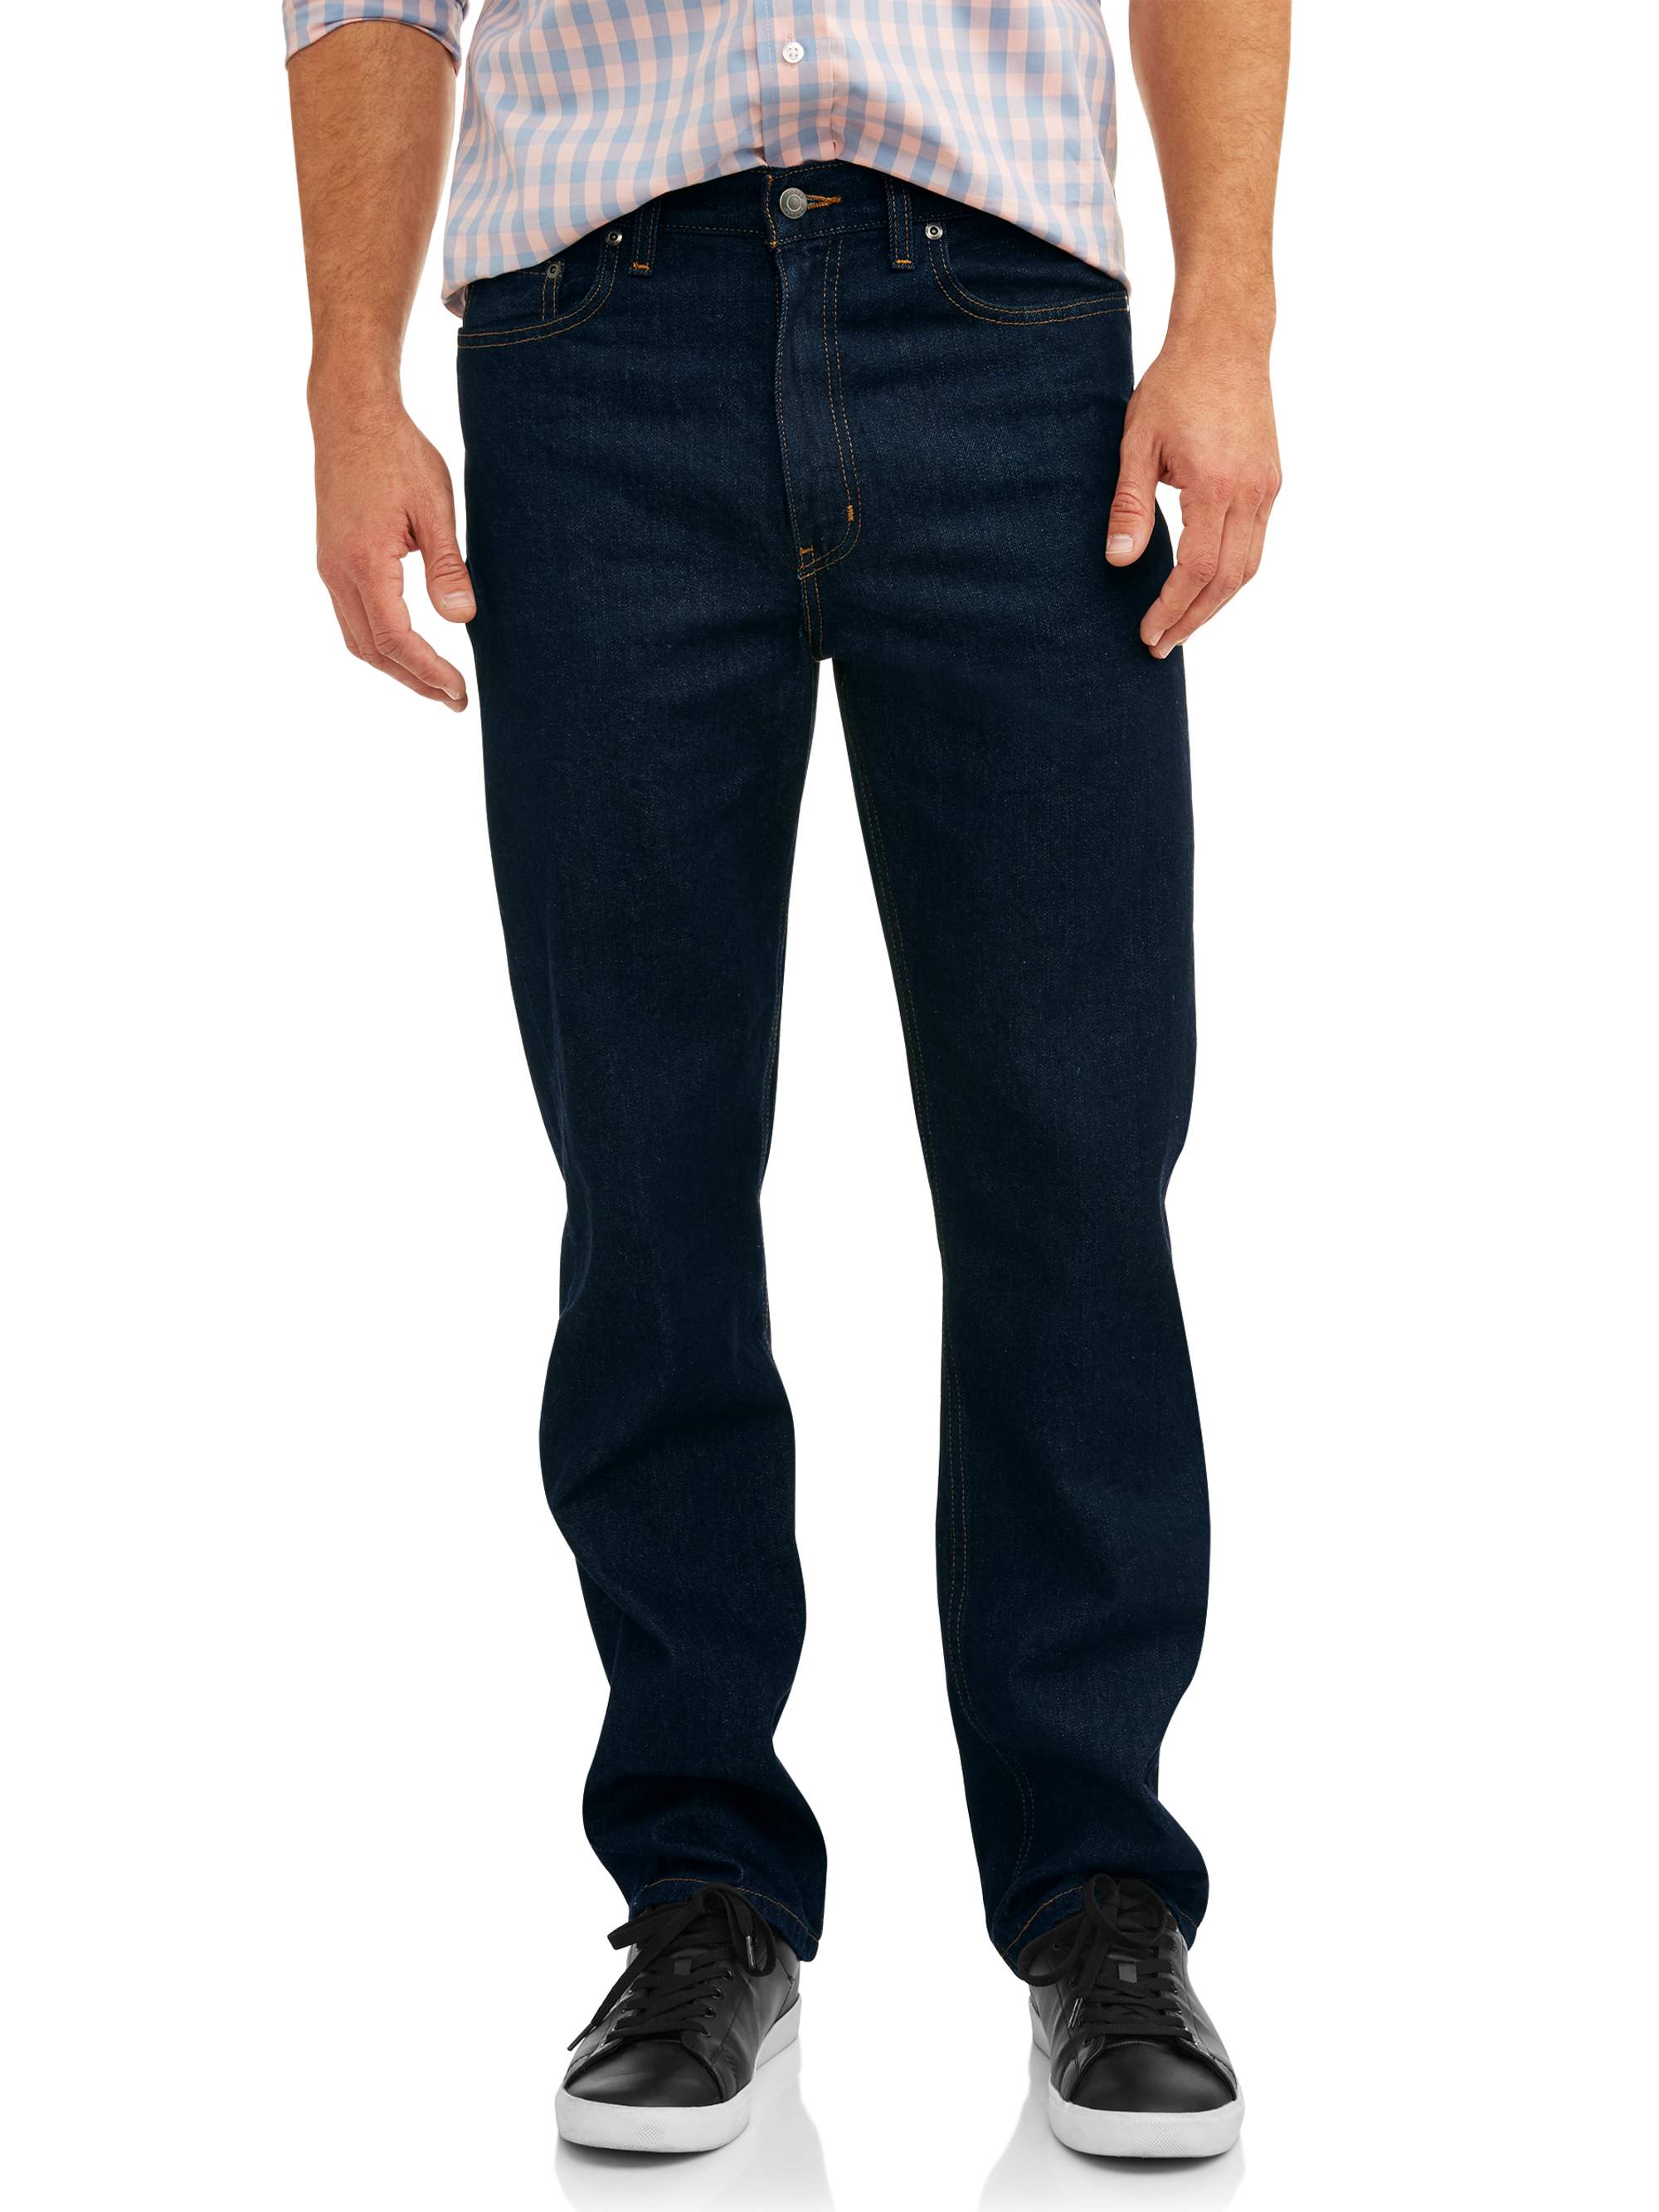 George Men's and Big Men's 100% Cotton Relaxed Fit Jeans - image 1 of 6